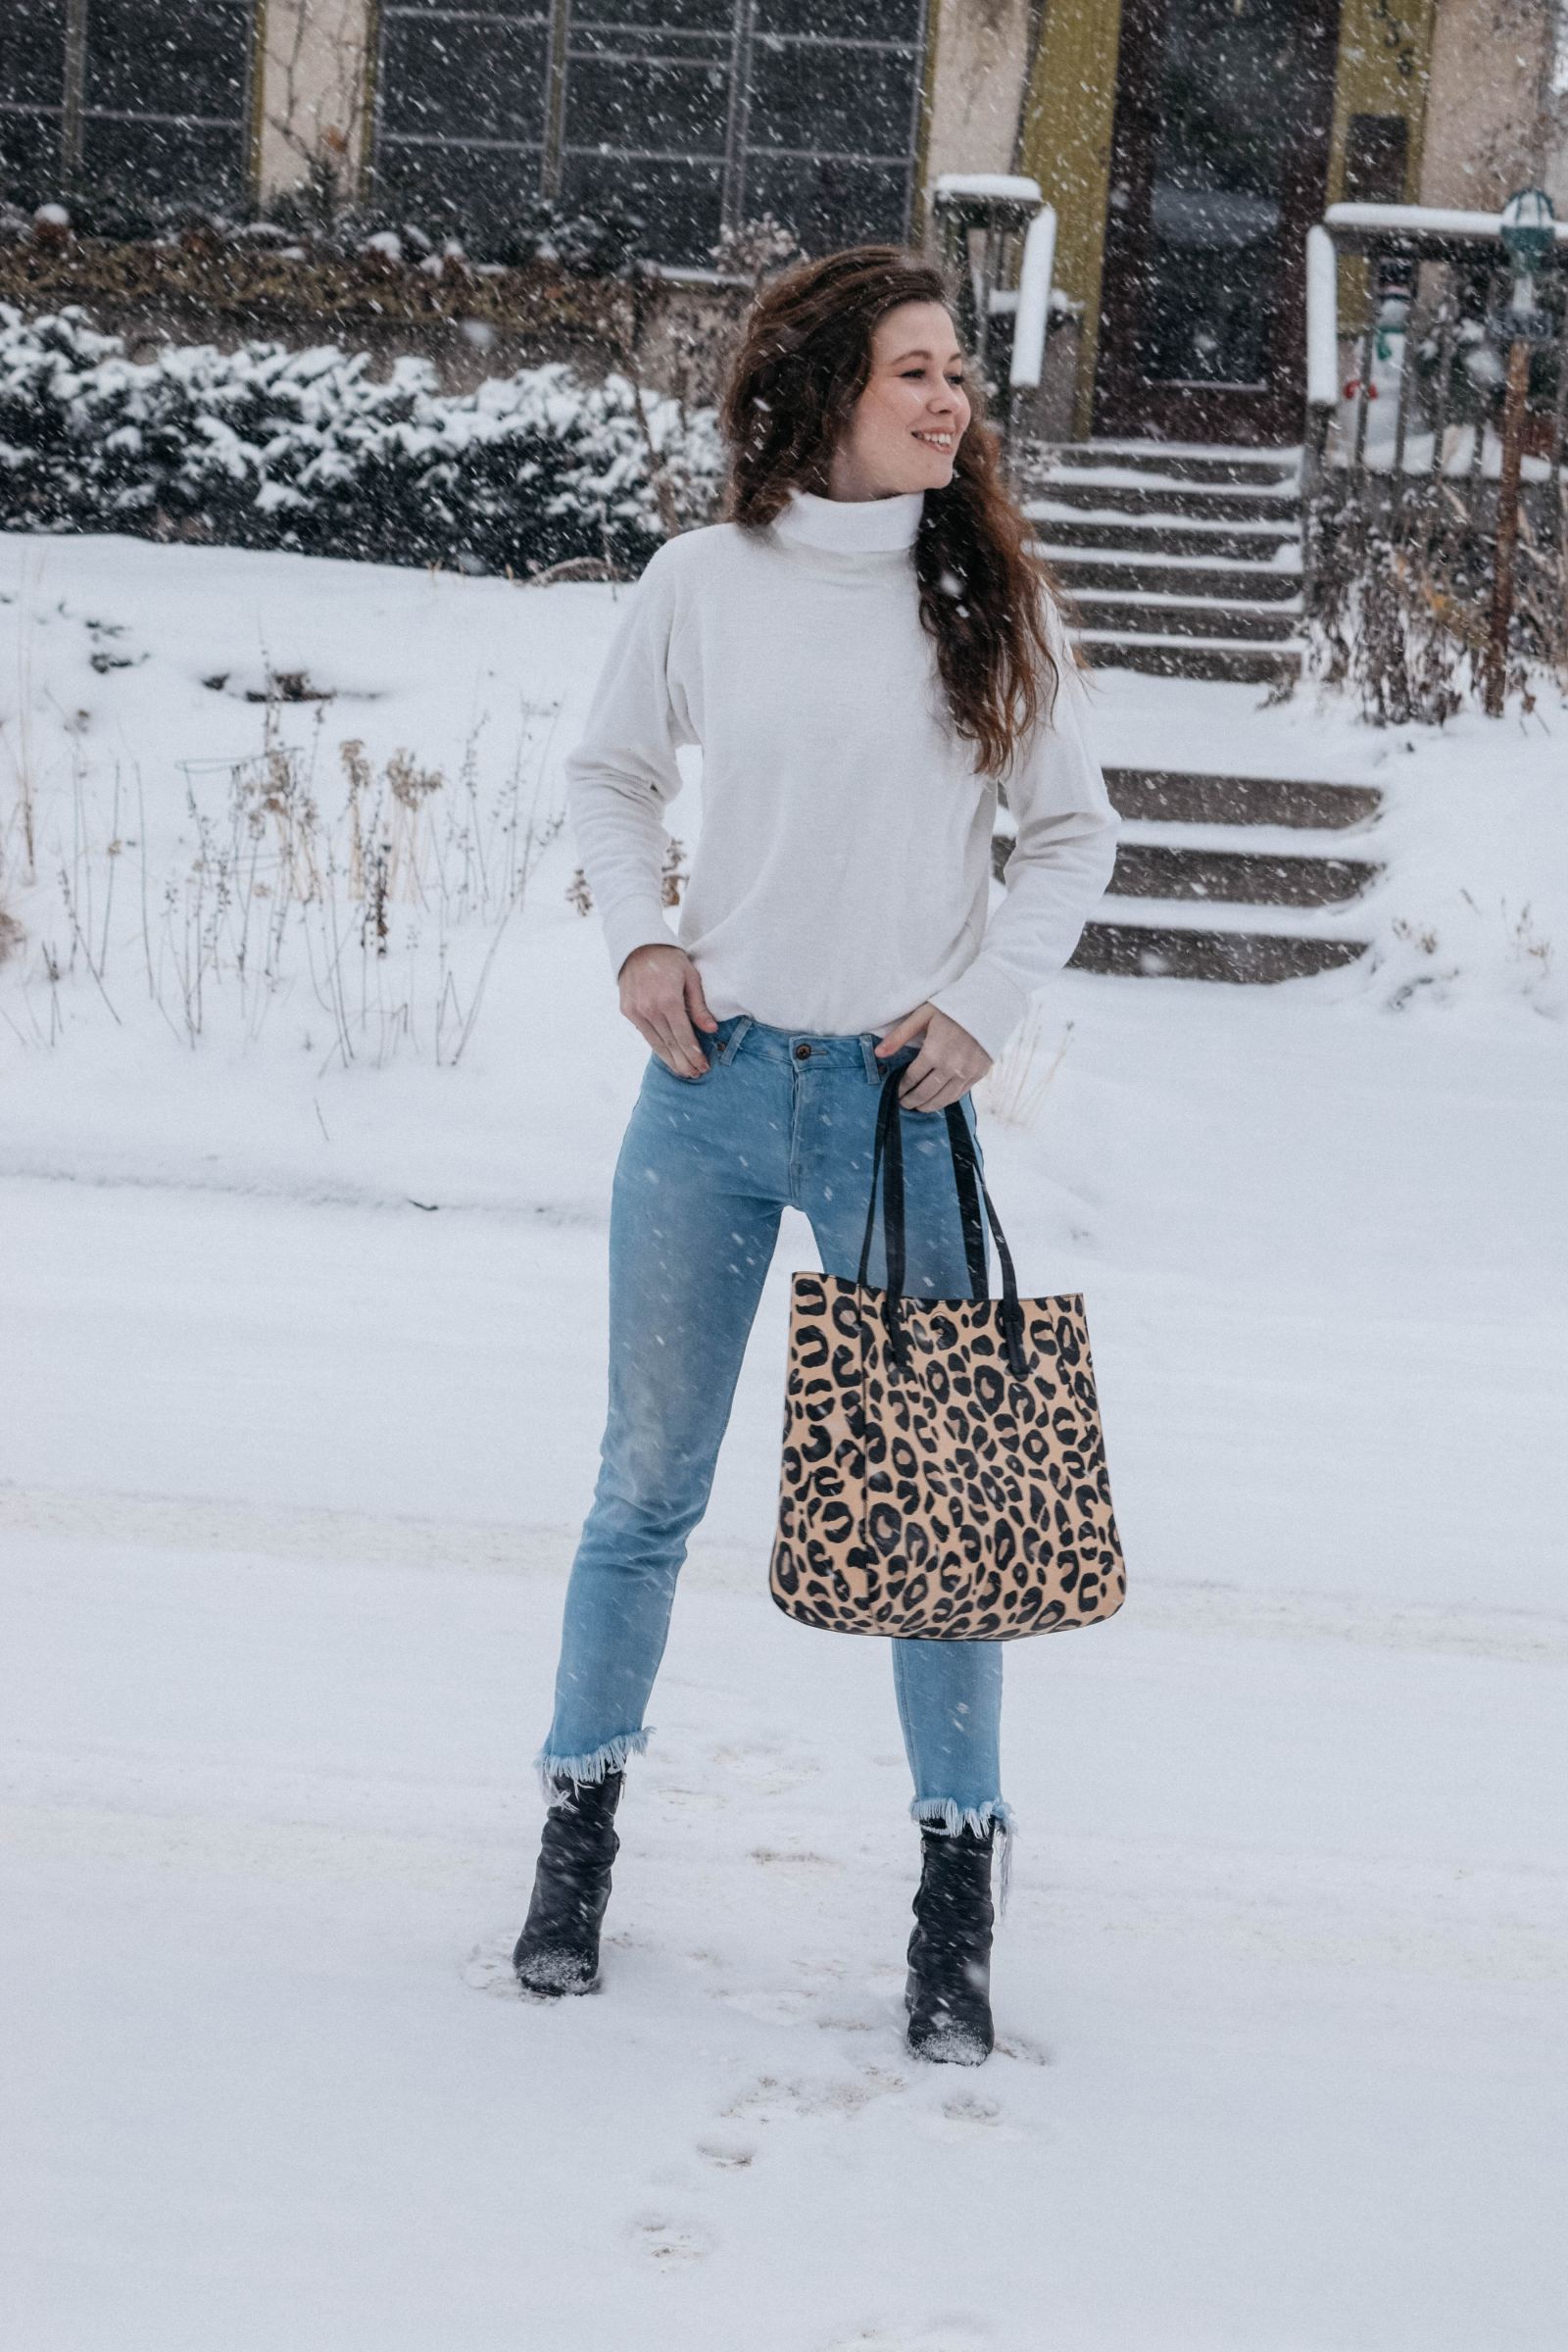 How to style a statement handbag?